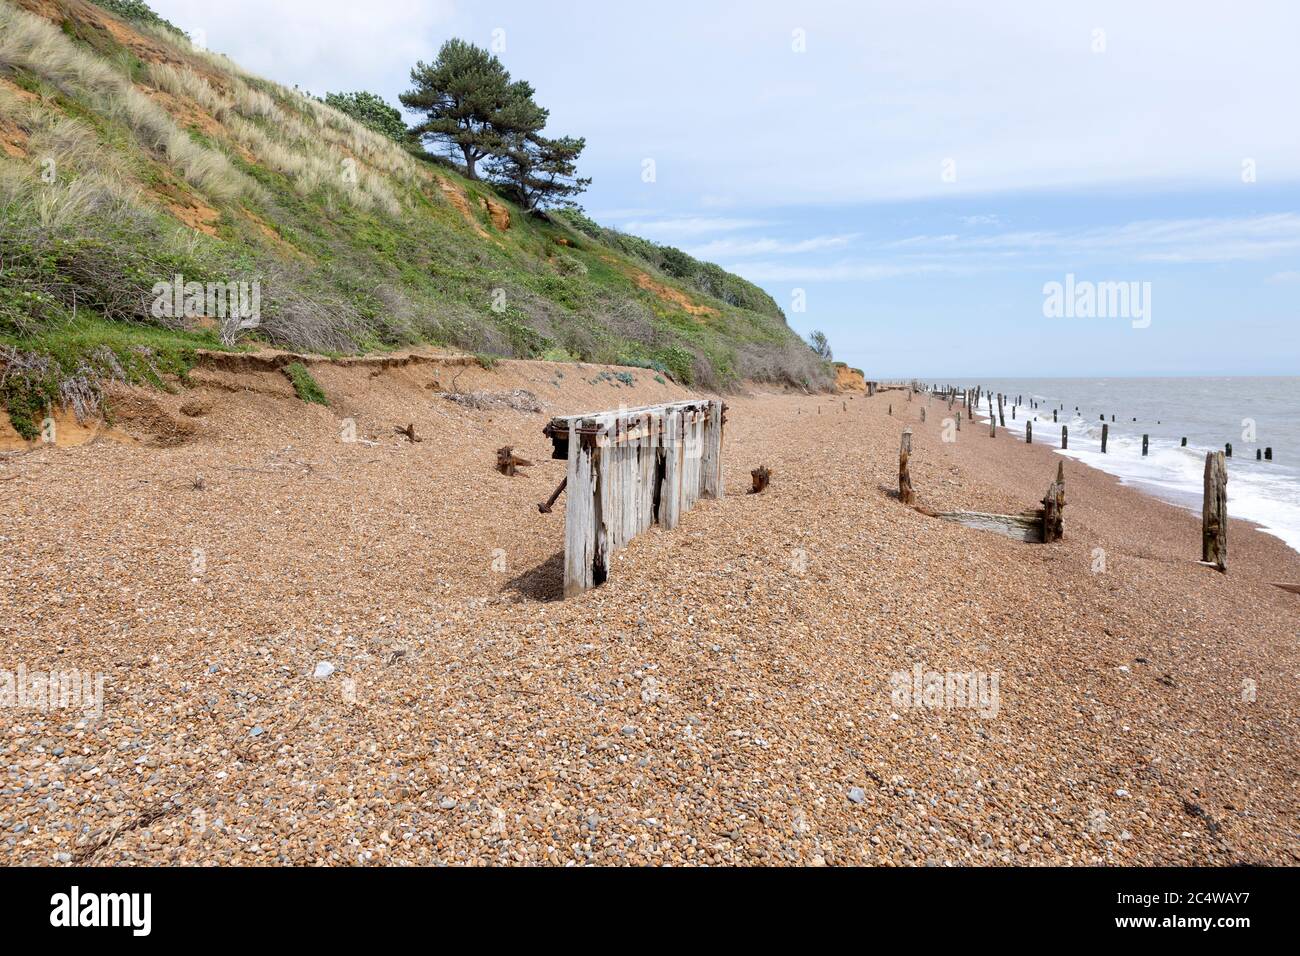 Remnants of old coastal defences and groynes most 1940s anti-invasion military structures, Bawdsey, Suffolk, England, UK Stock Photo